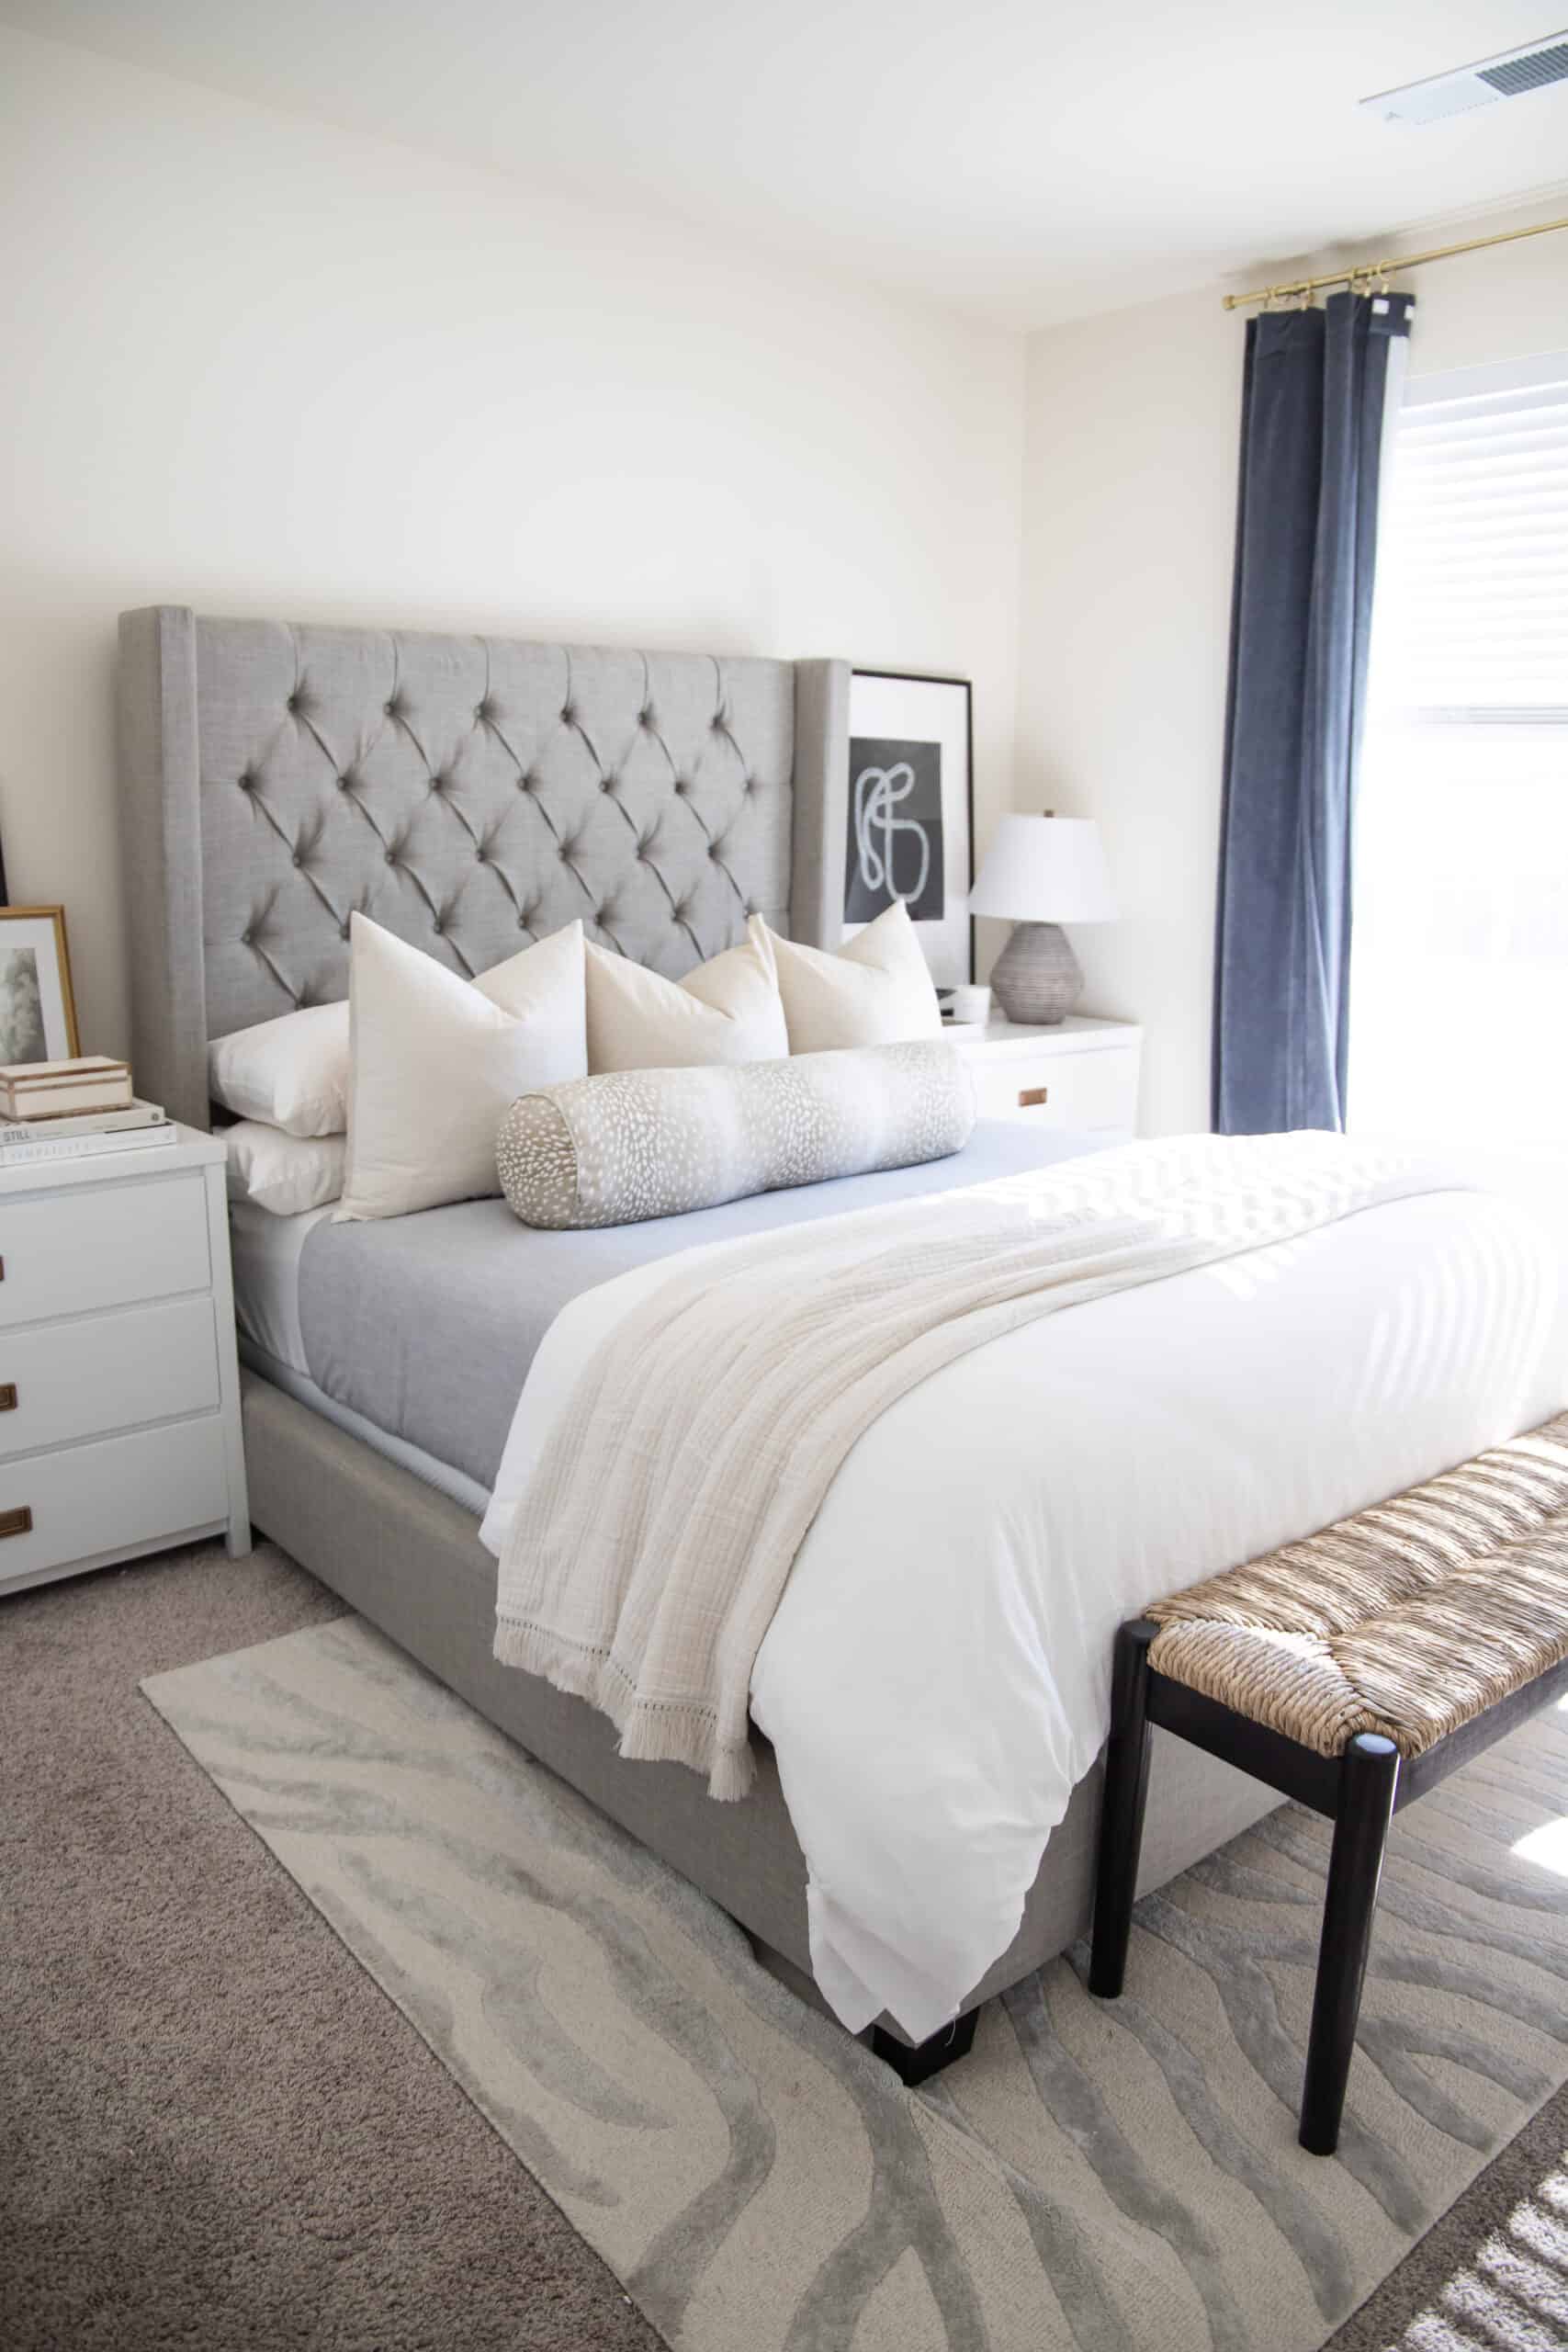 5 Easy Tips & Tricks To Keep Sheets On Your Bed